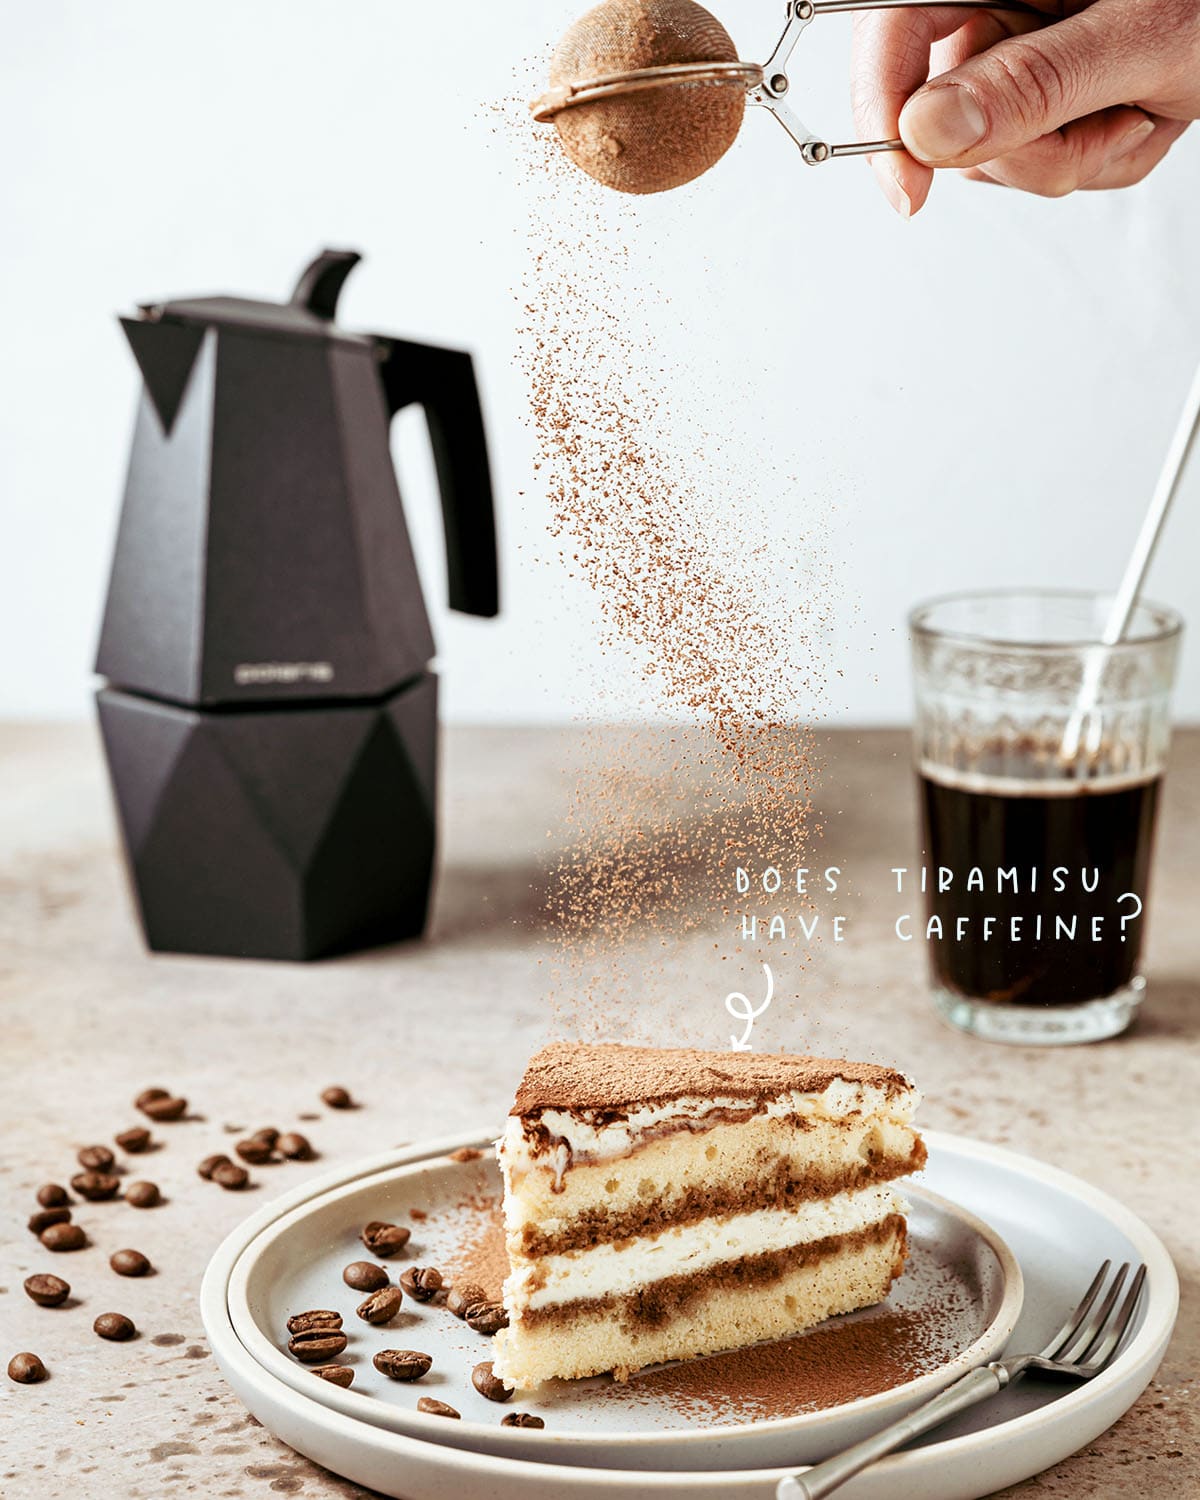 The main ingredient in Tiramisu is ladyfingers, which are biscuit-like cookies made with egg whites, sugar, and flour. Tiramisu consists of ladyfingers soaked in coffee, indicating that the dessert probably contains some caffeine.